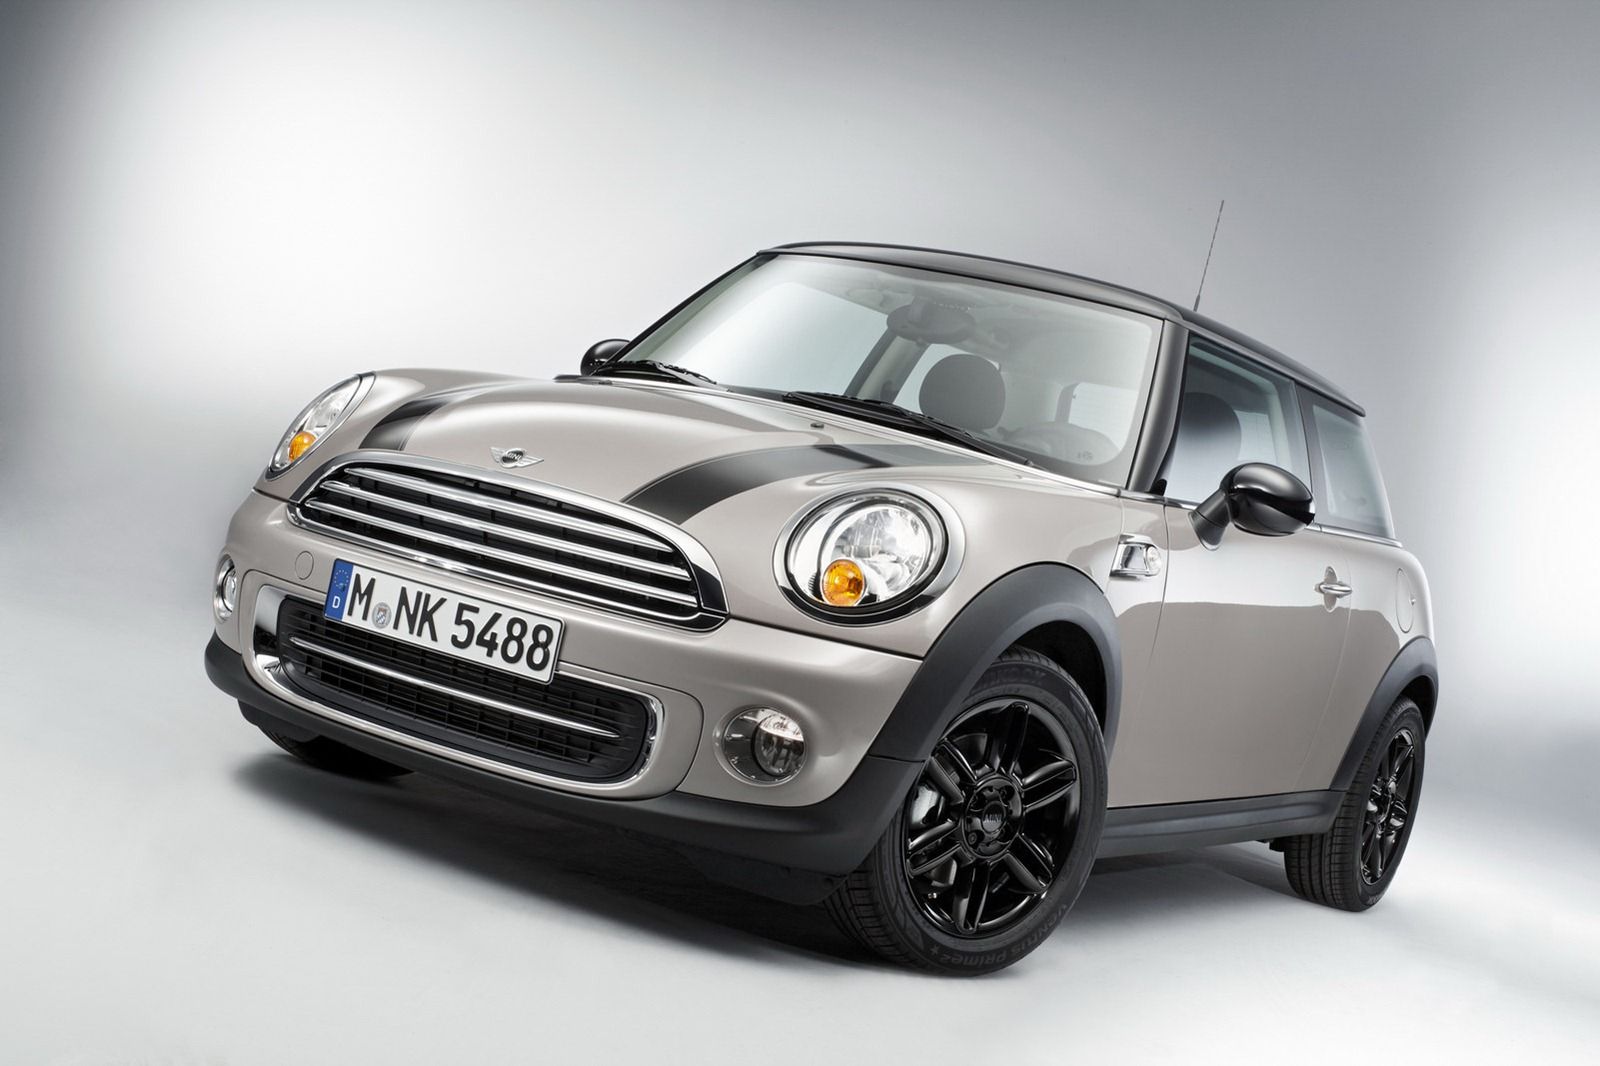 2012 MINI Cooper Baker Street Special Edition